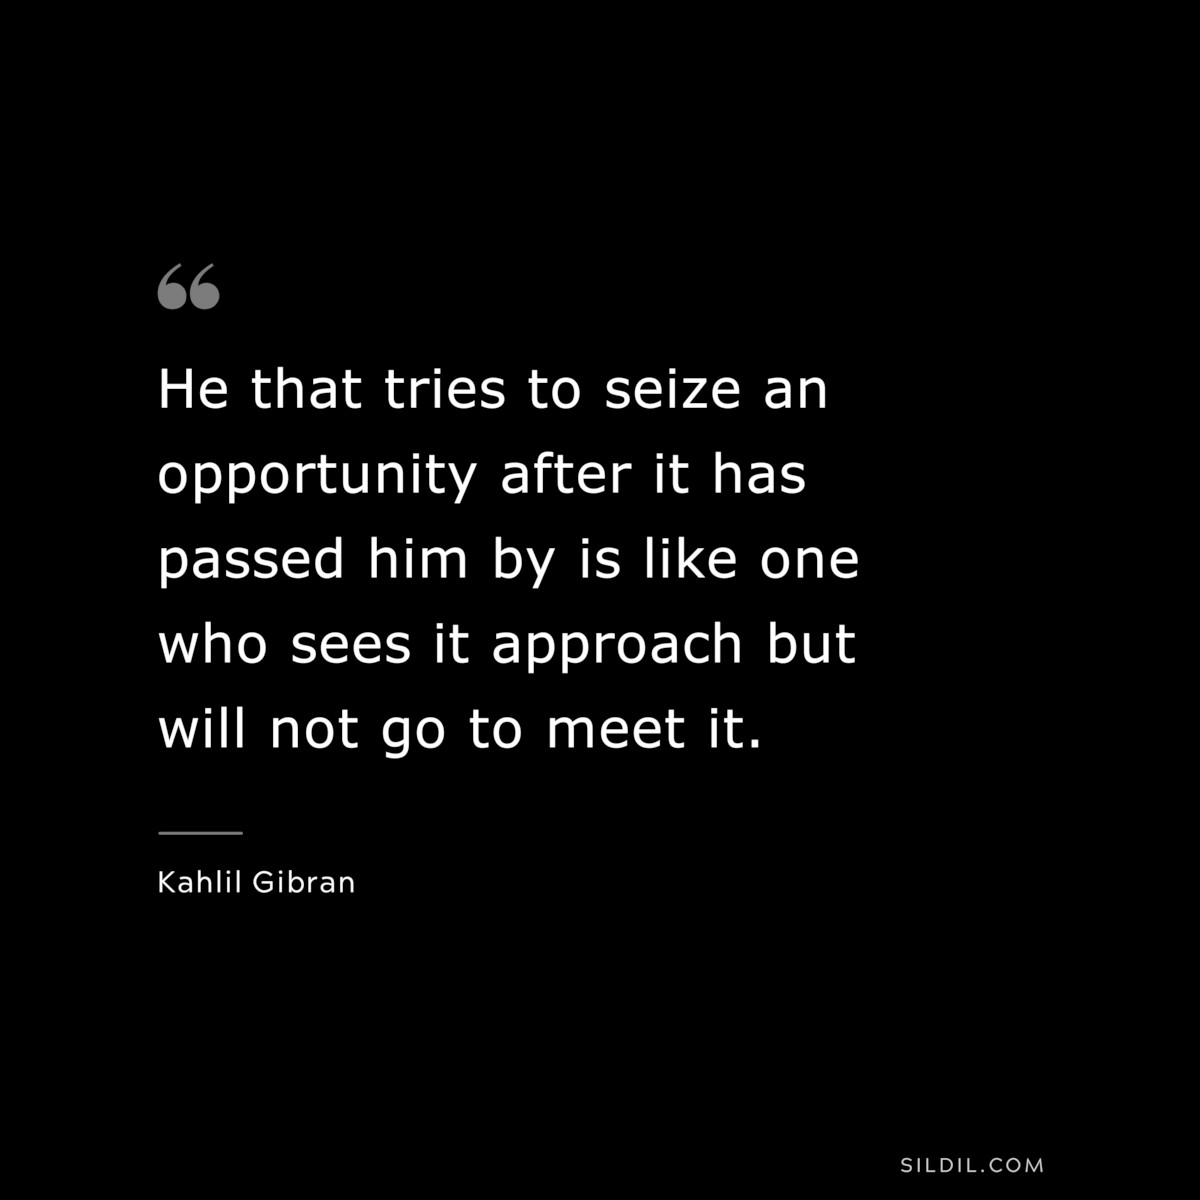 He that tries to seize an opportunity after it has passed him by is like one who sees it approach but will not go to meet it. ― Kahlil Gibran